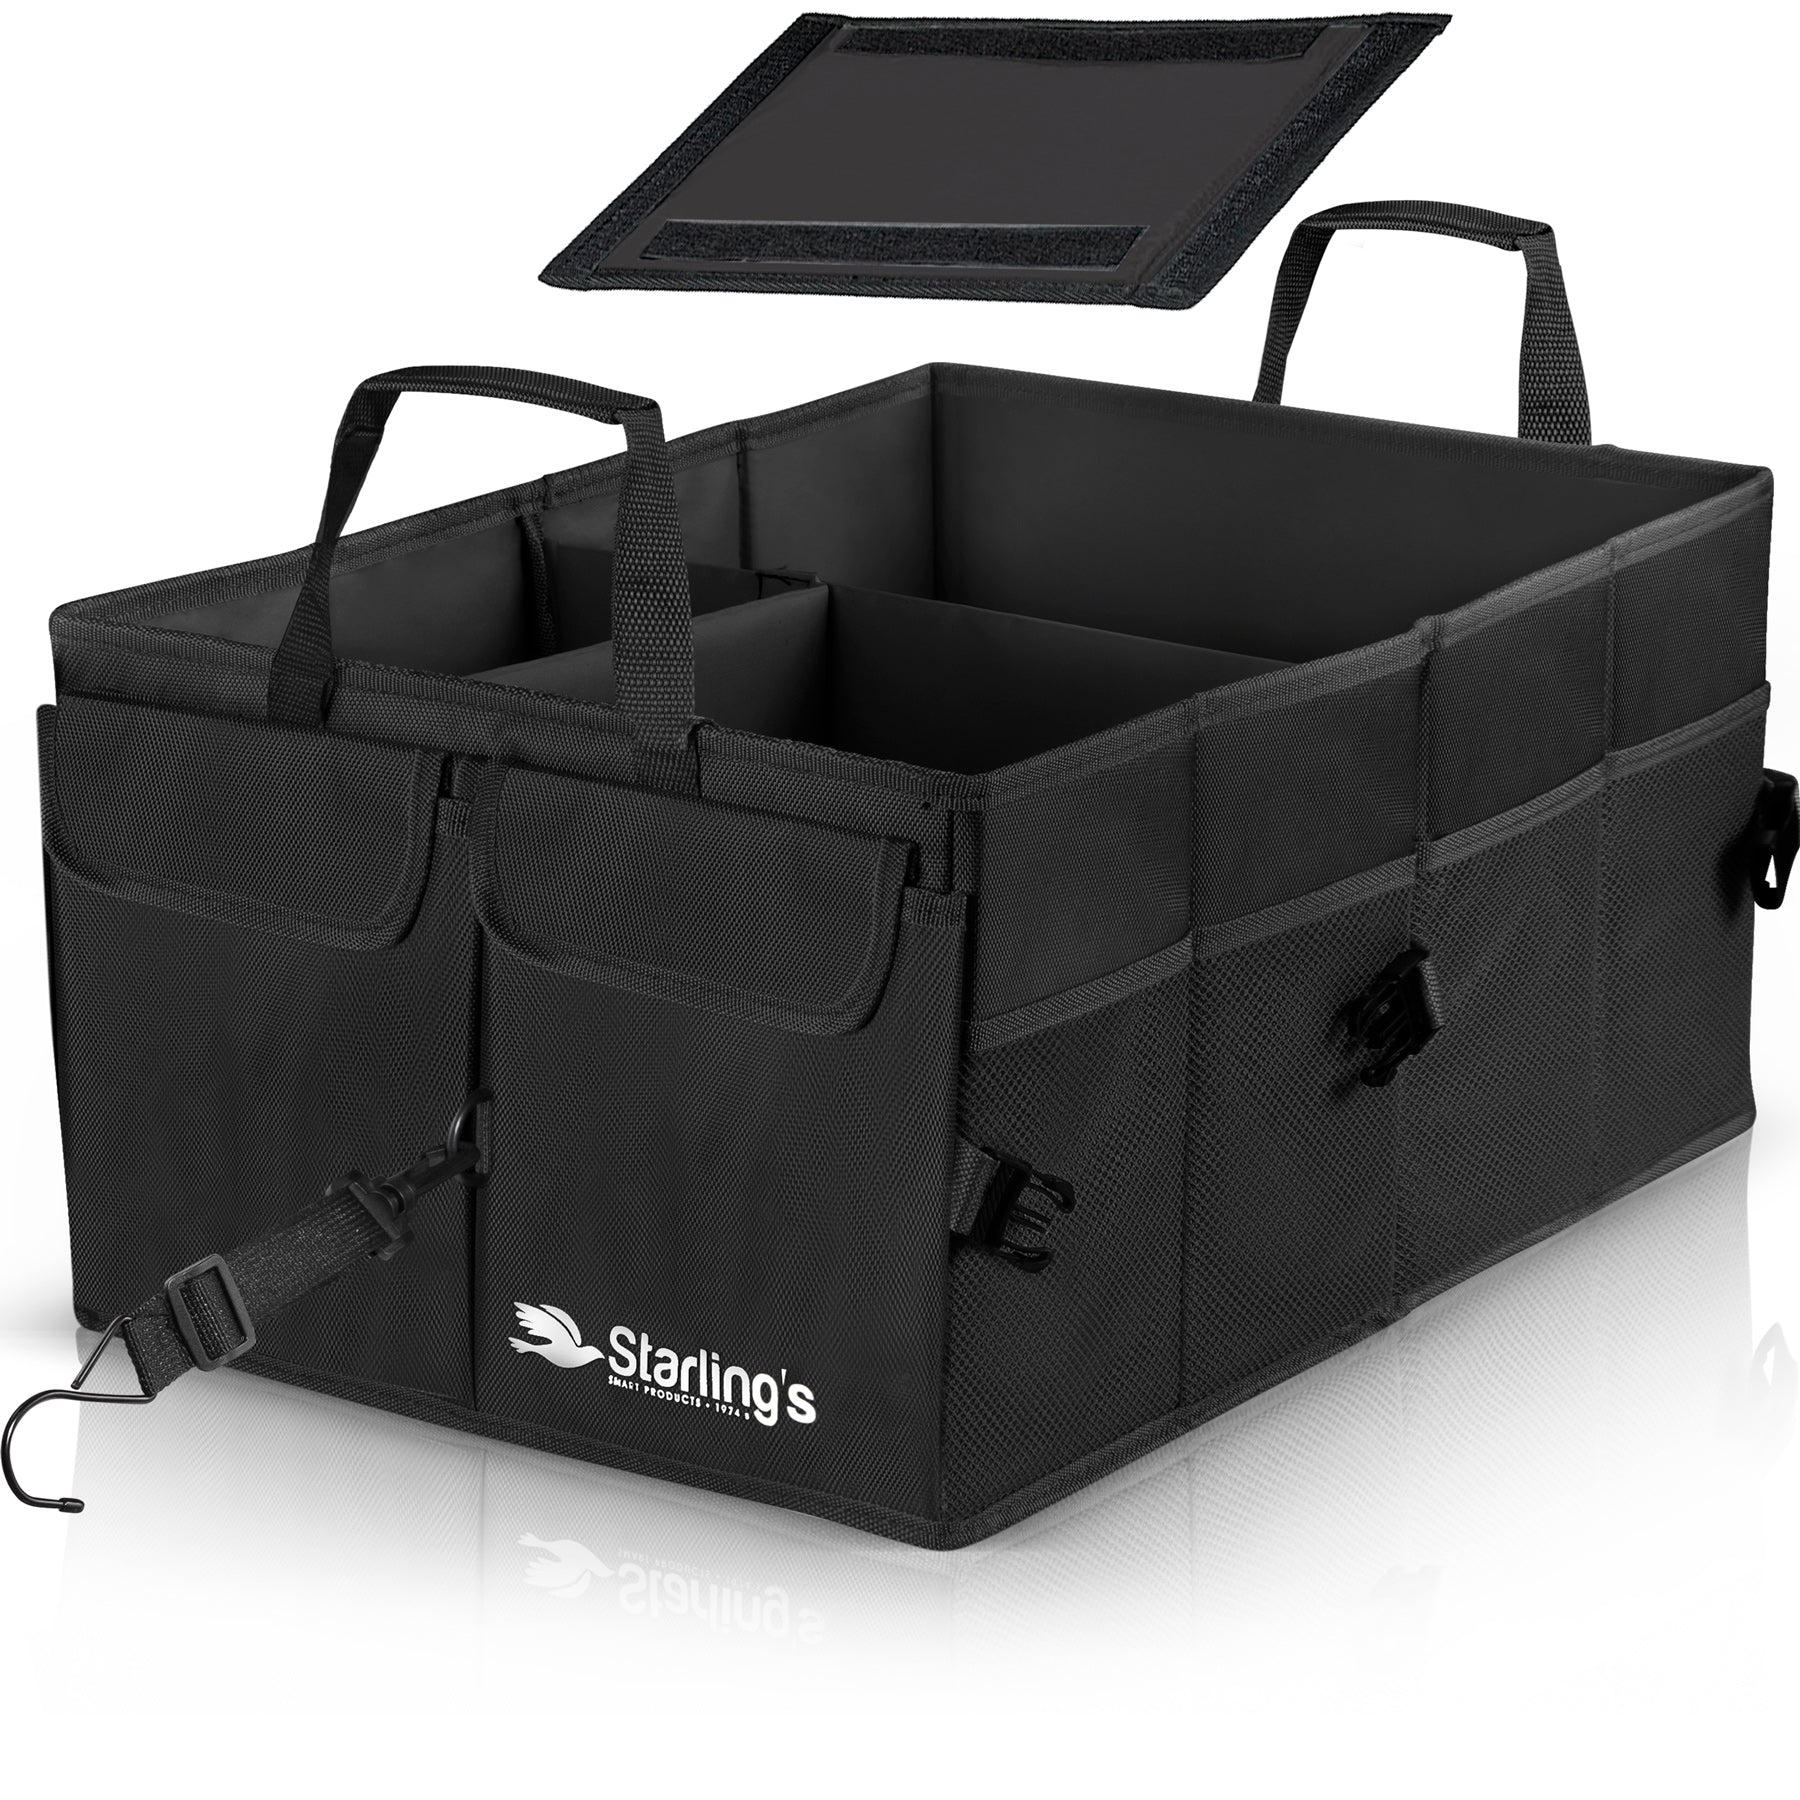 Starling's Car Trunk Organizer - Super Strong, Foldable Storage Cargo